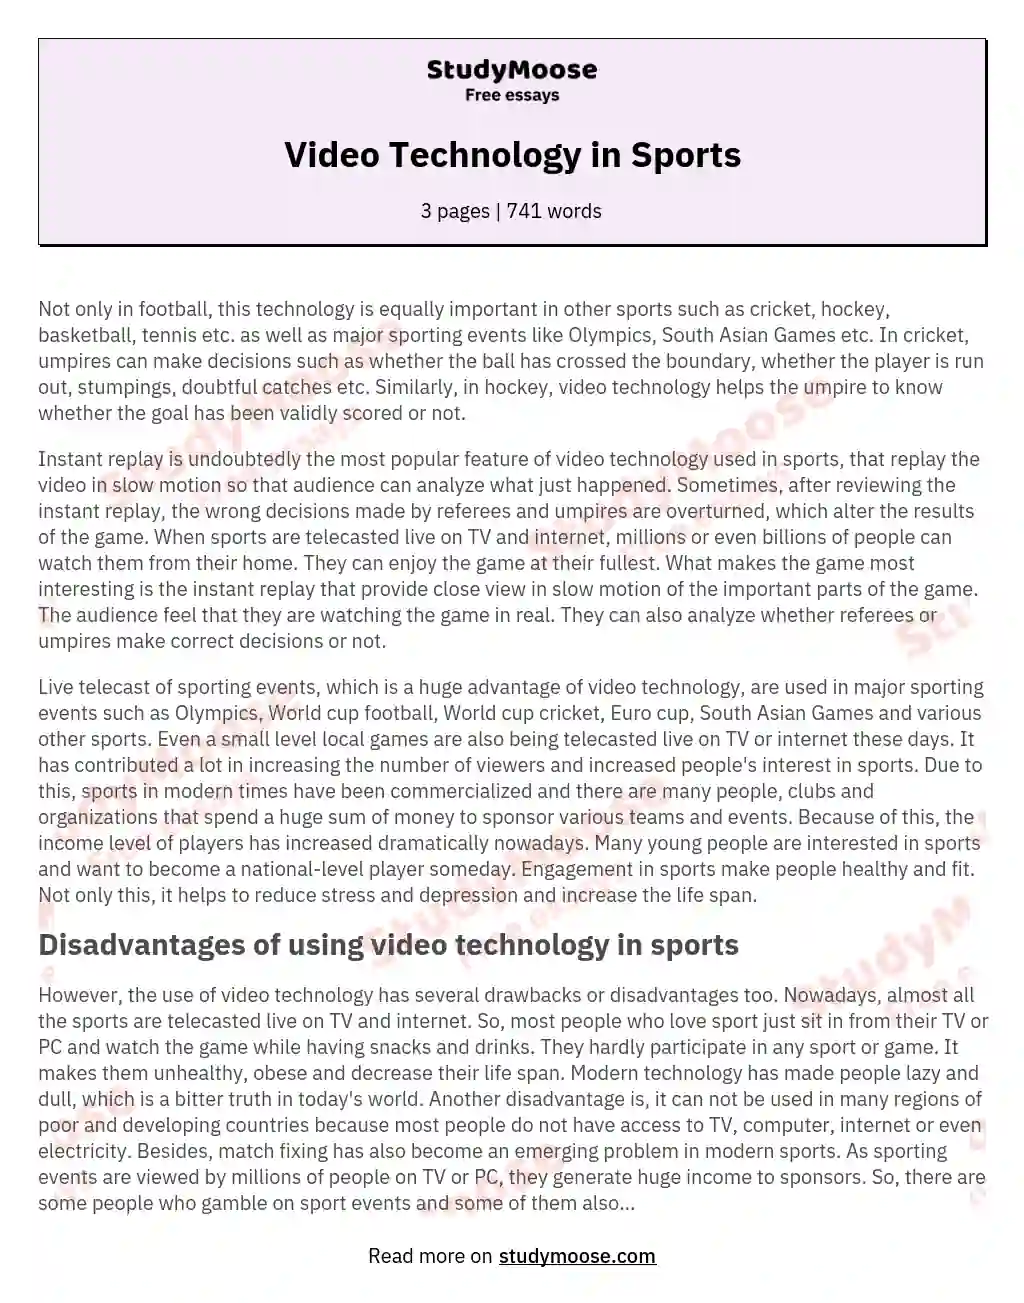 Video Technology in Sports essay